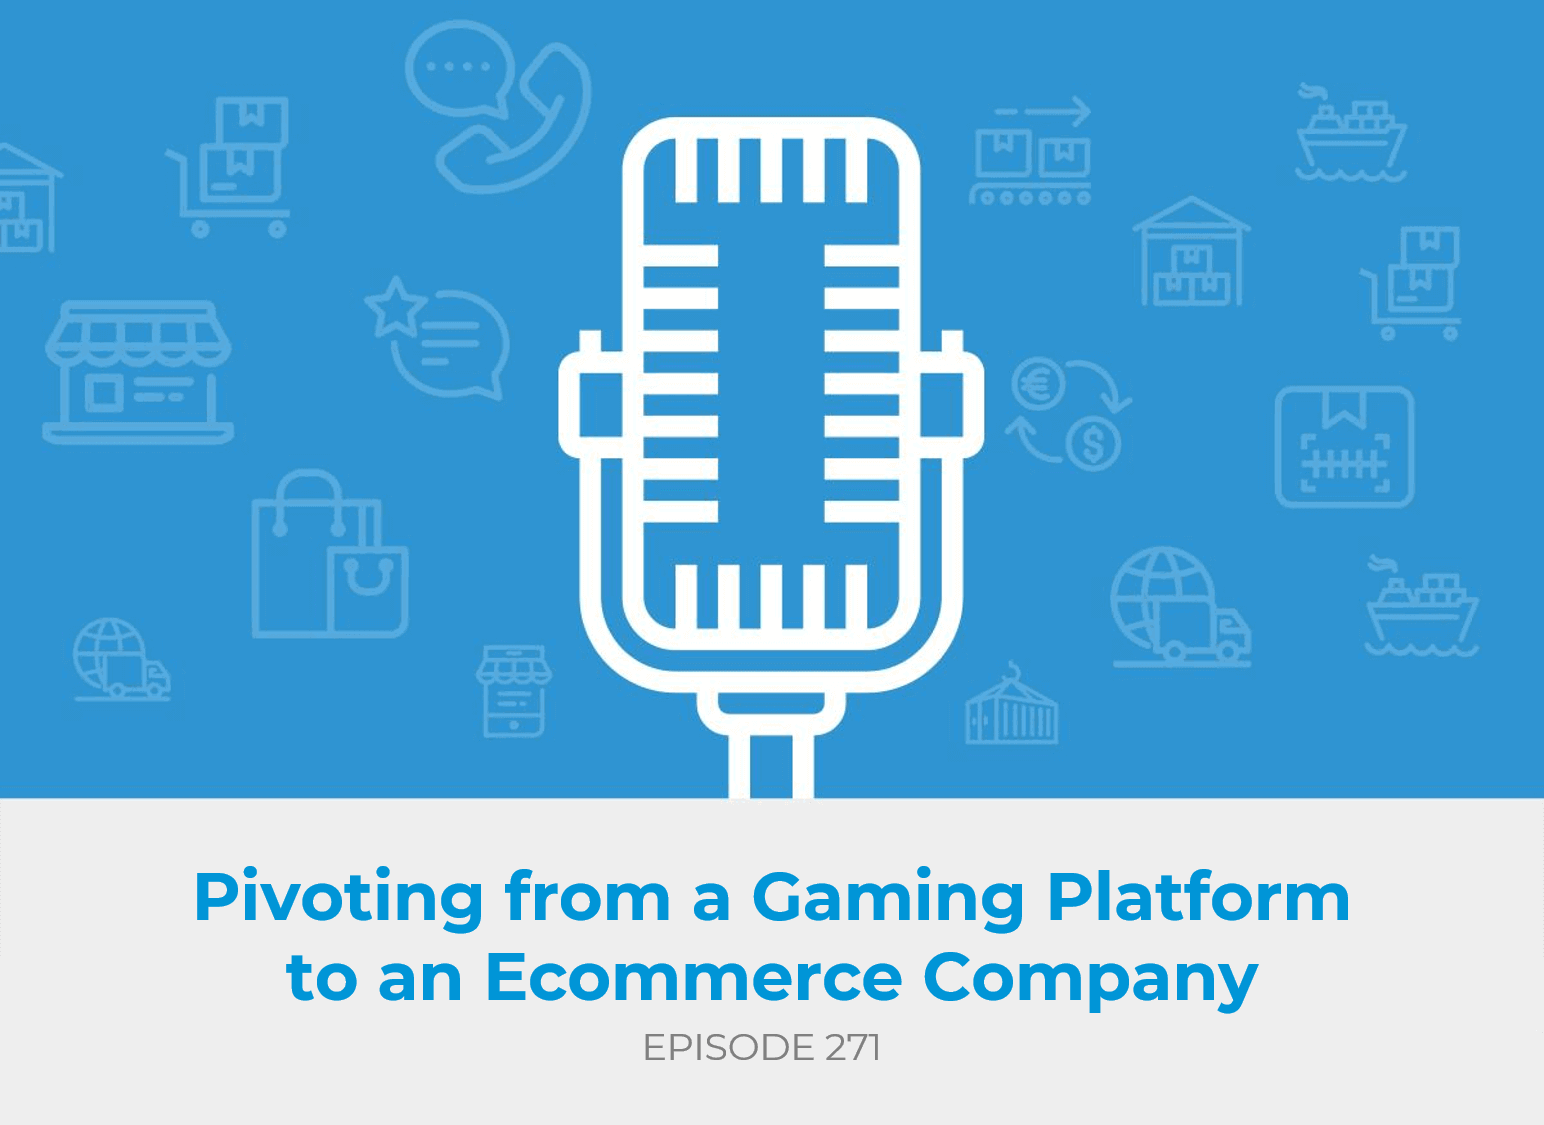 Pivoting from a Gaming Platform to an Ecommerce Company